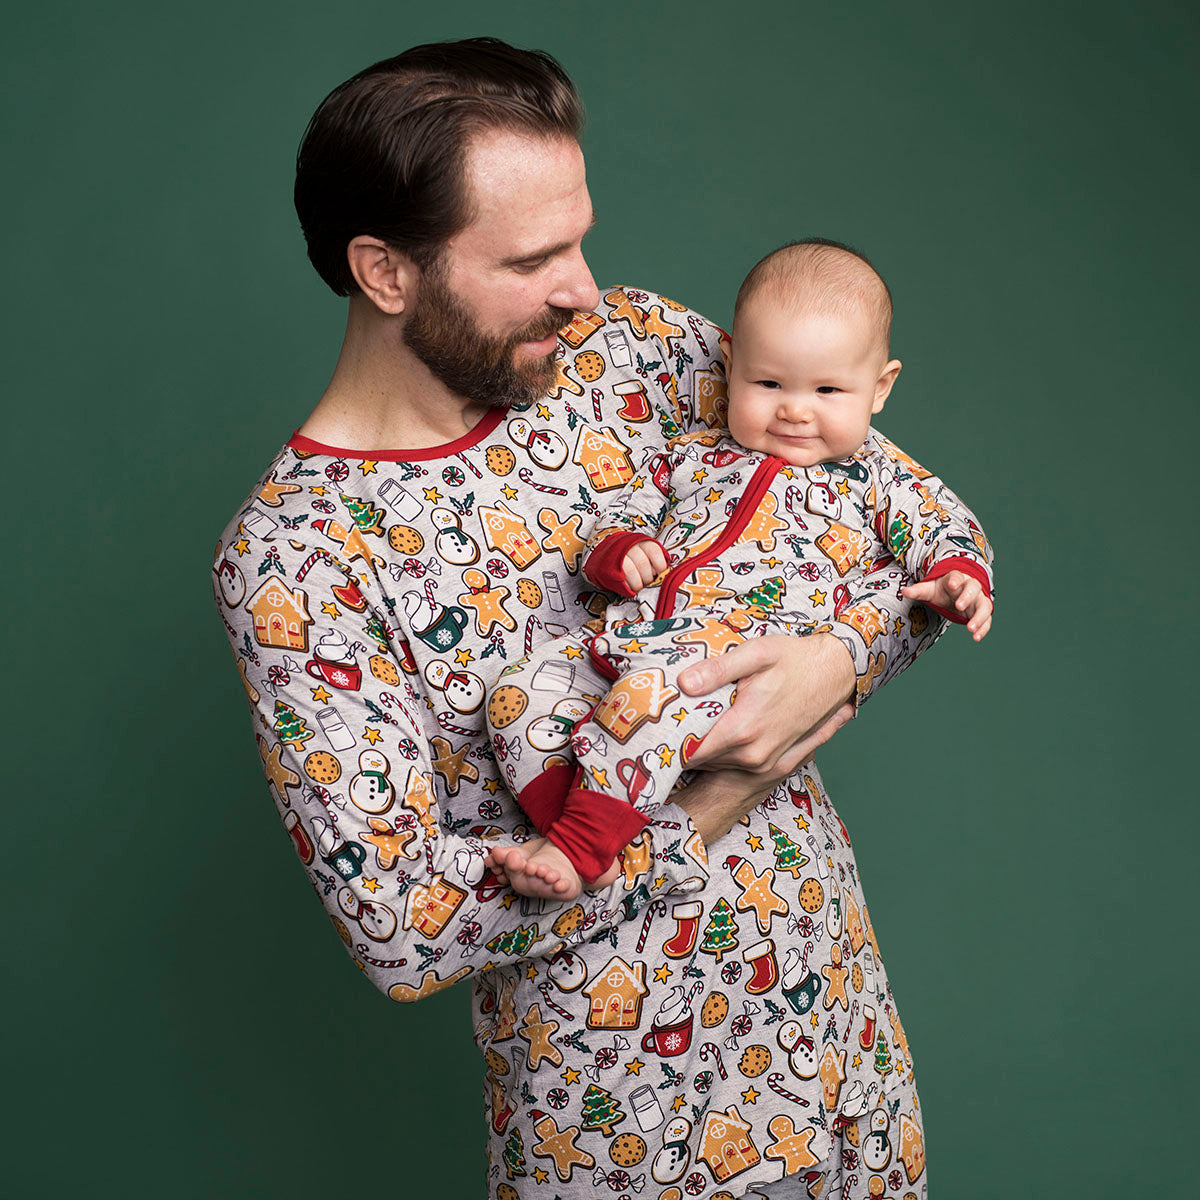 Father holding his son matching in Holiday Treats pajamas. Dad is wearing Holiday Treats men's pajama top paired with matching men's pajama pants. Child is wearing Holiday Treats zippy 